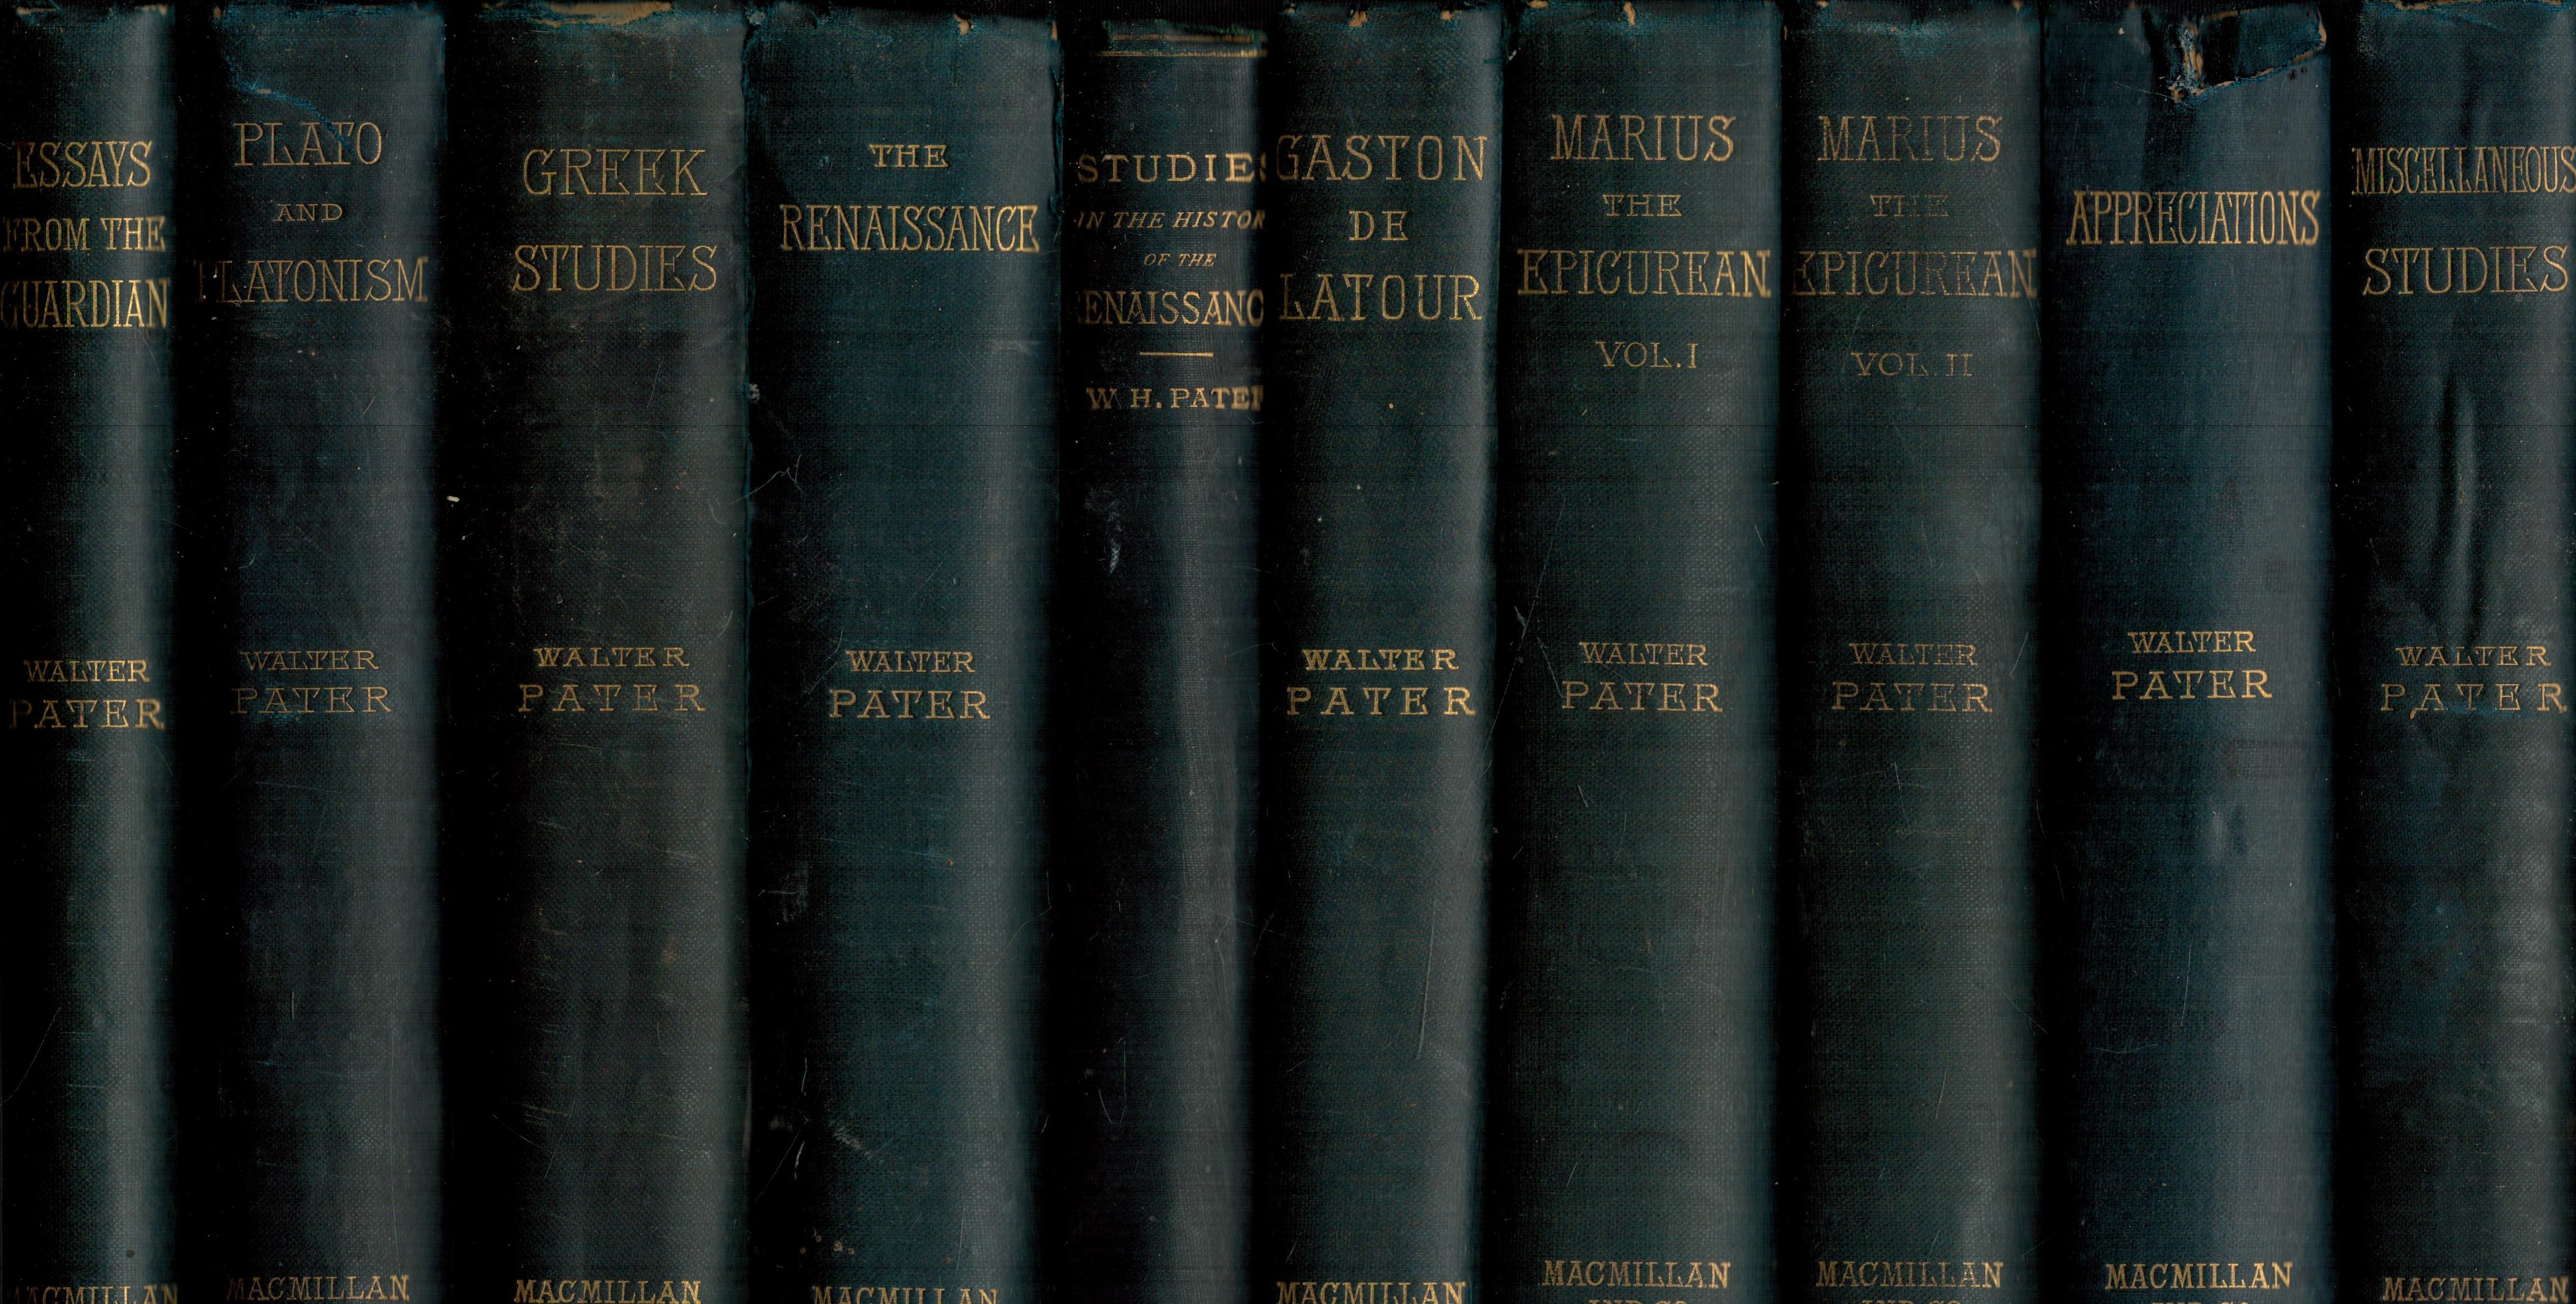 Walter Pater This is a ten-volume matching set of works by Walter Pater. This ten set of matching